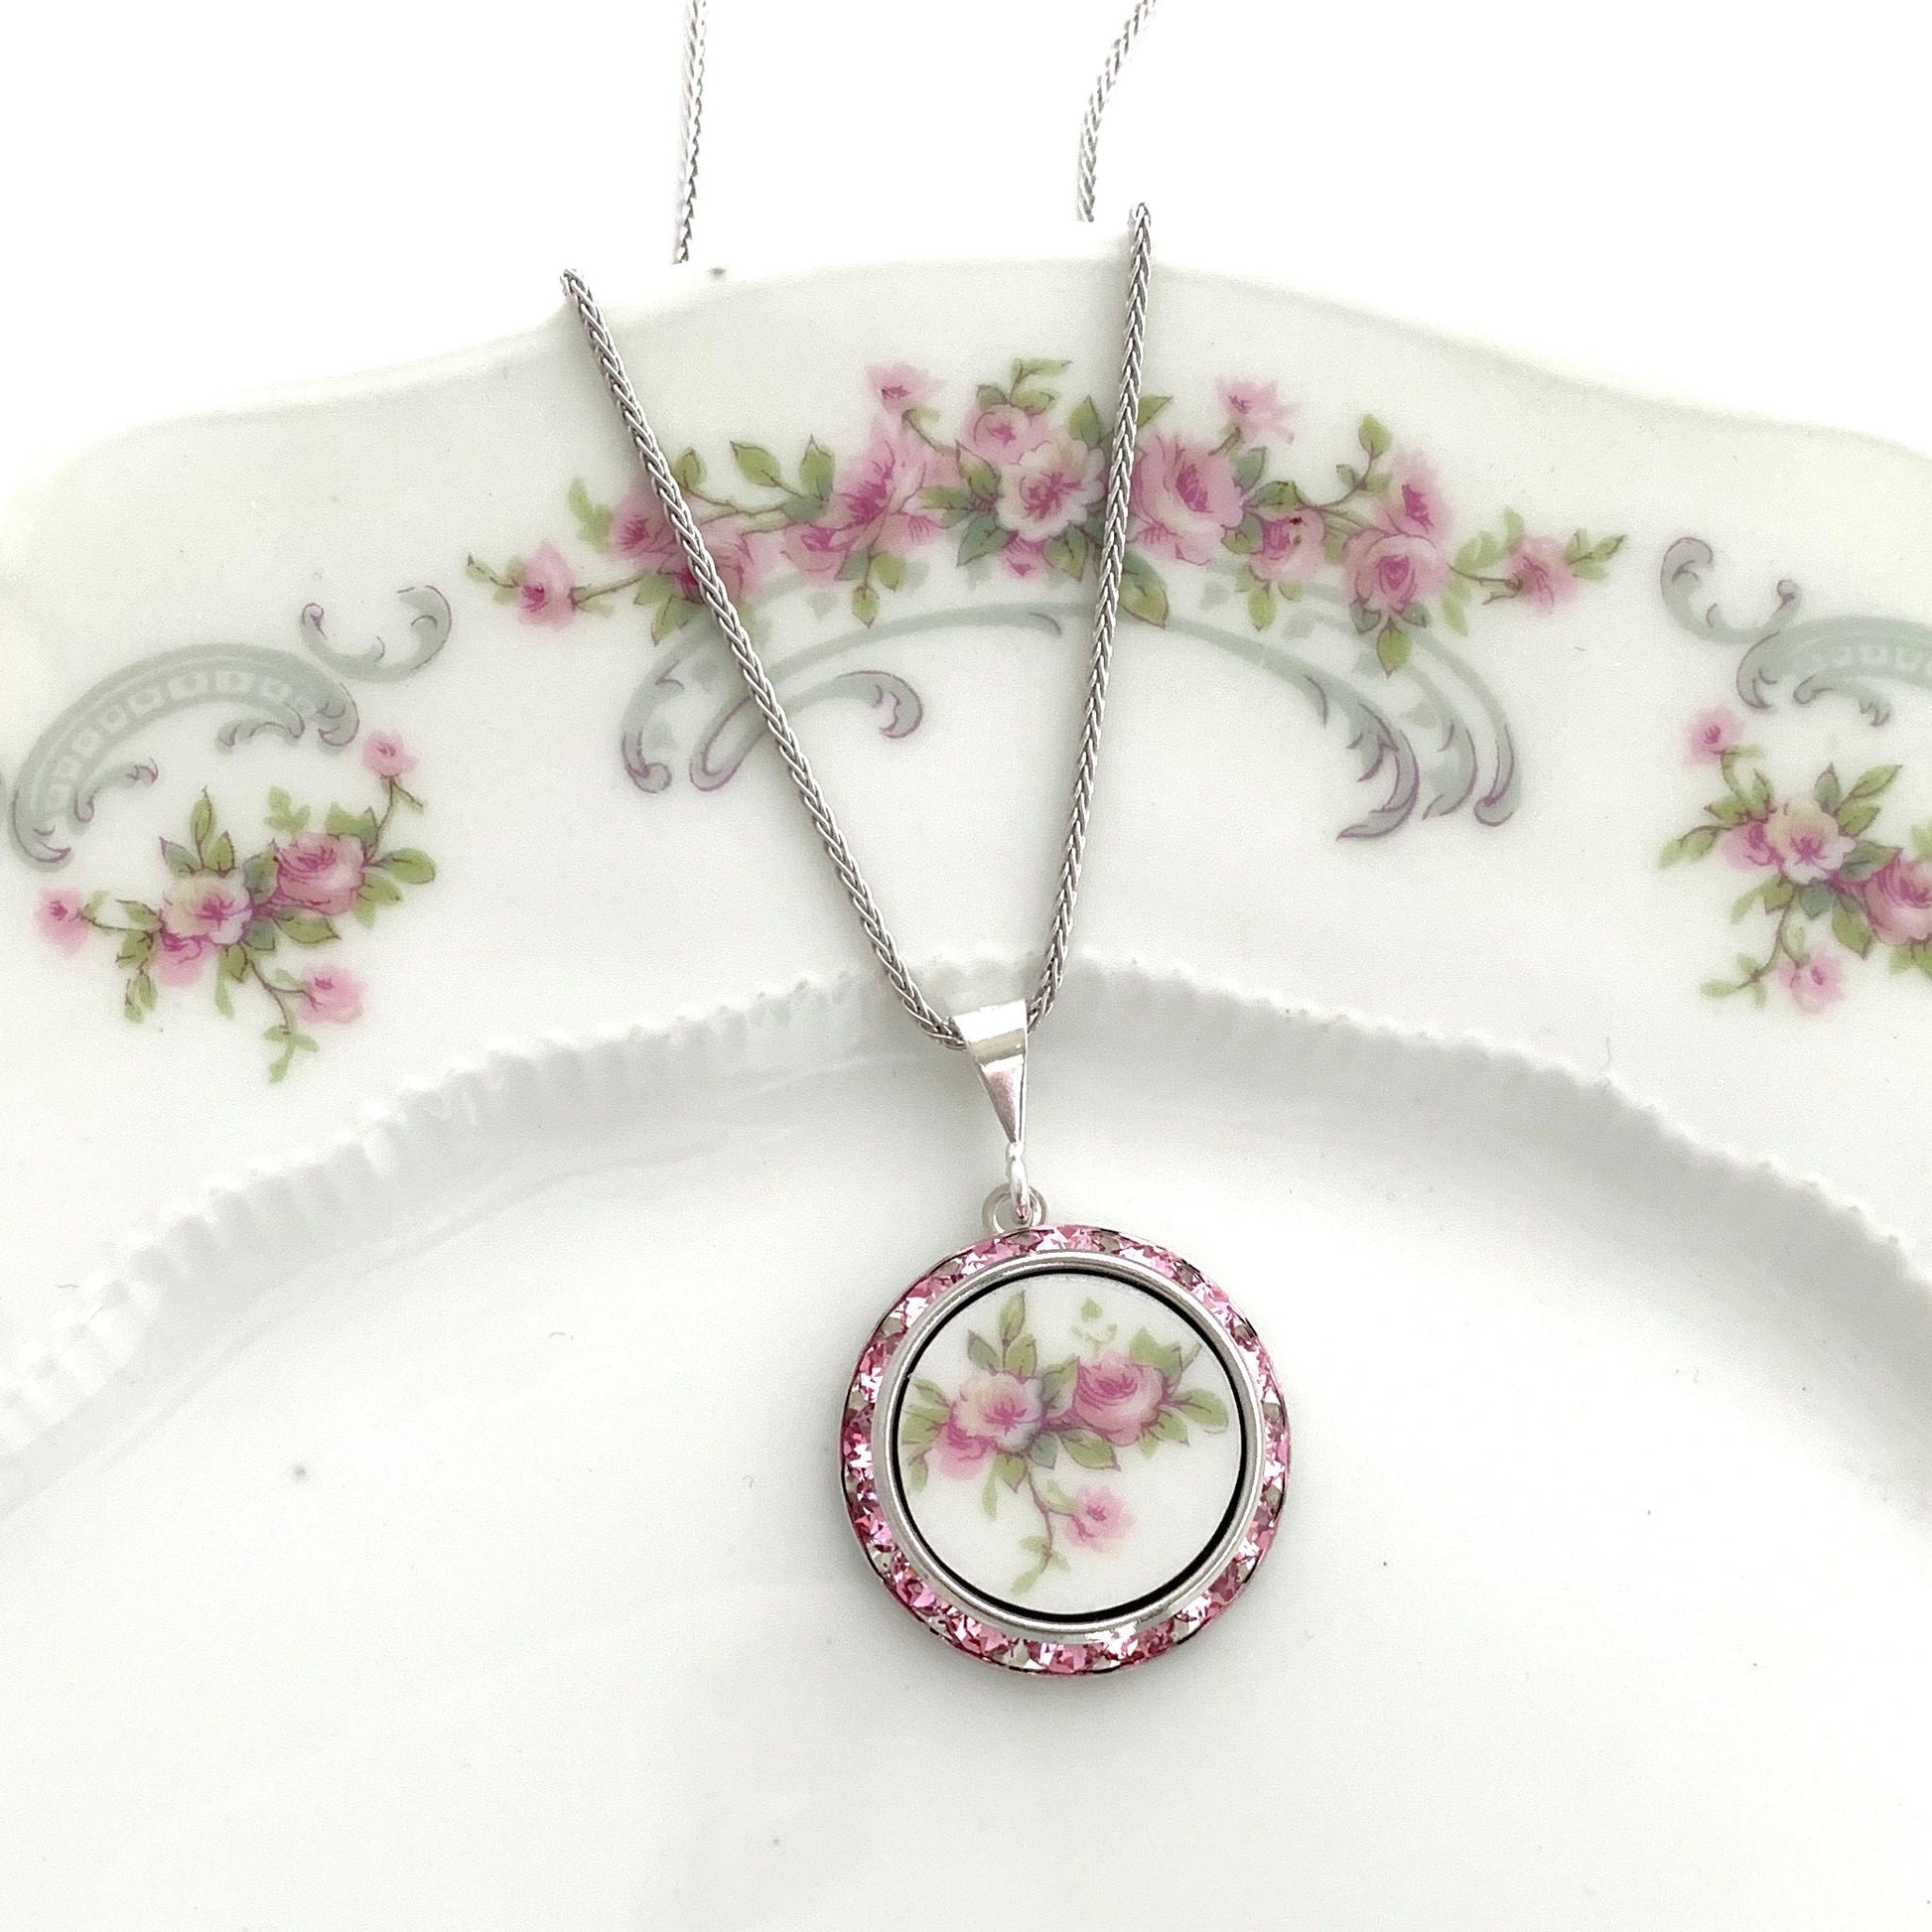 French Limoges China Necklace, 20th Anniversary Gift for Wife, Crystal Necklace, Shabby Chic Broken China Jewelry, Birthday Gift